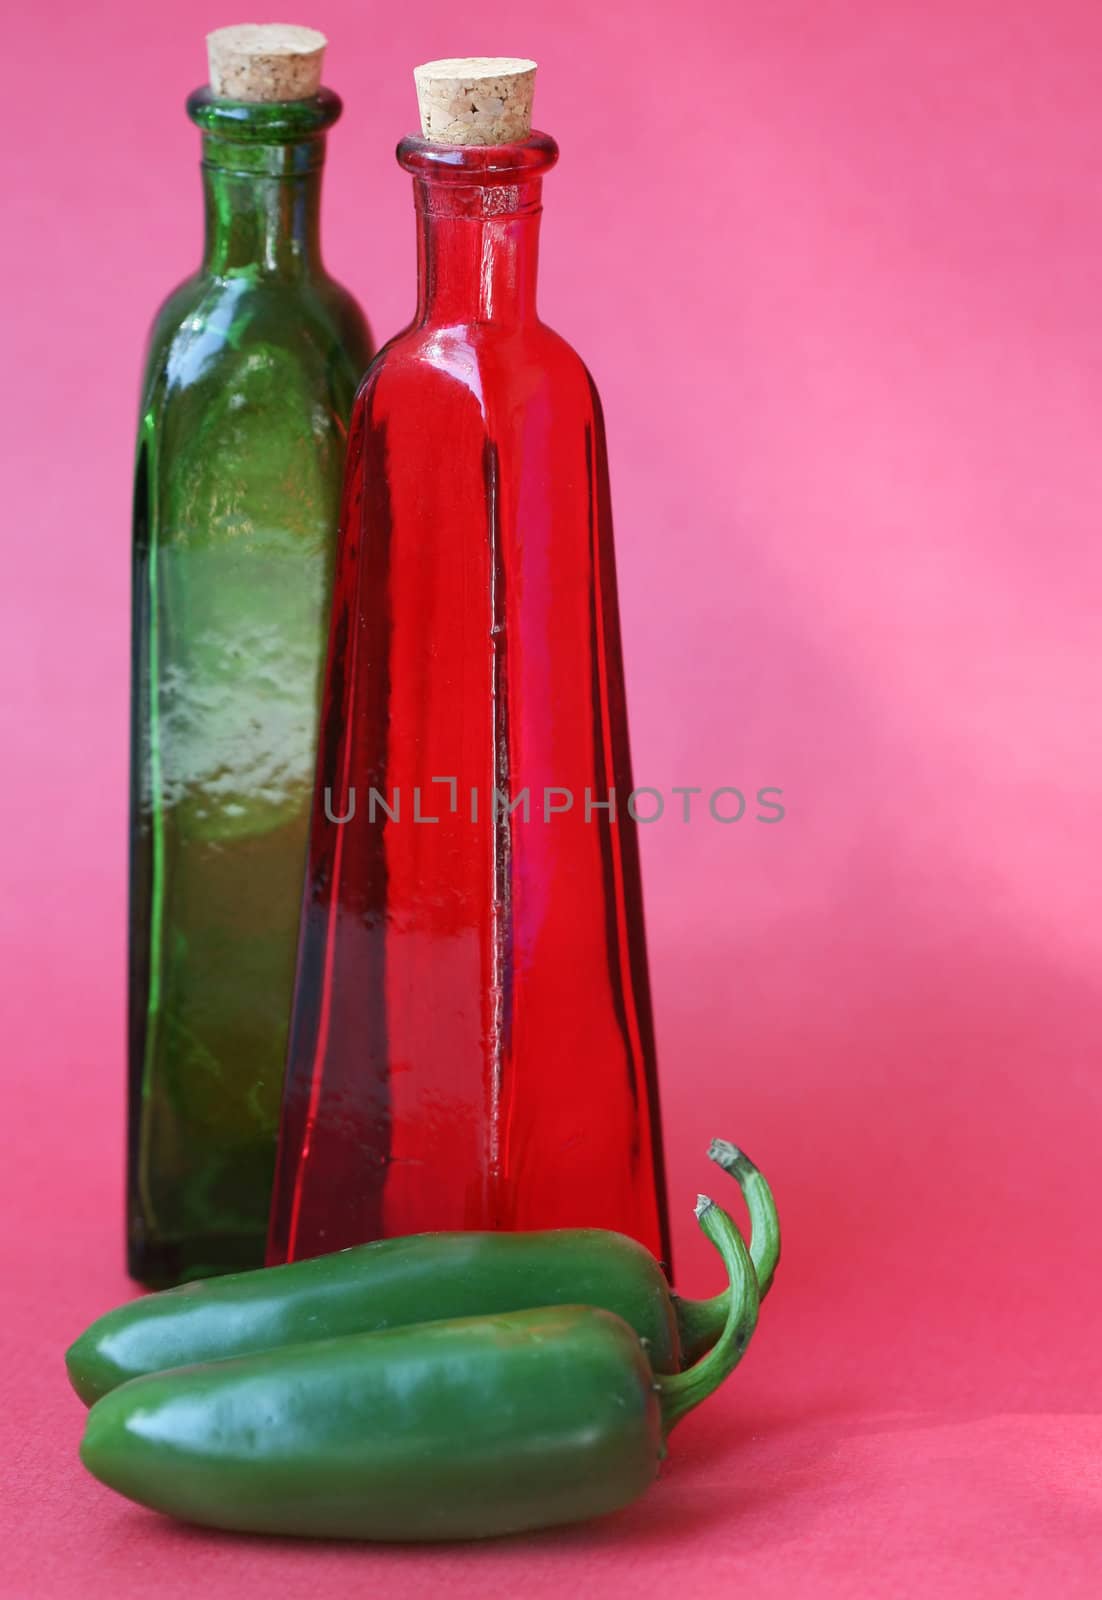 Glass bottle with a cork in the top and jalapeno peppers in front Shot against a red background